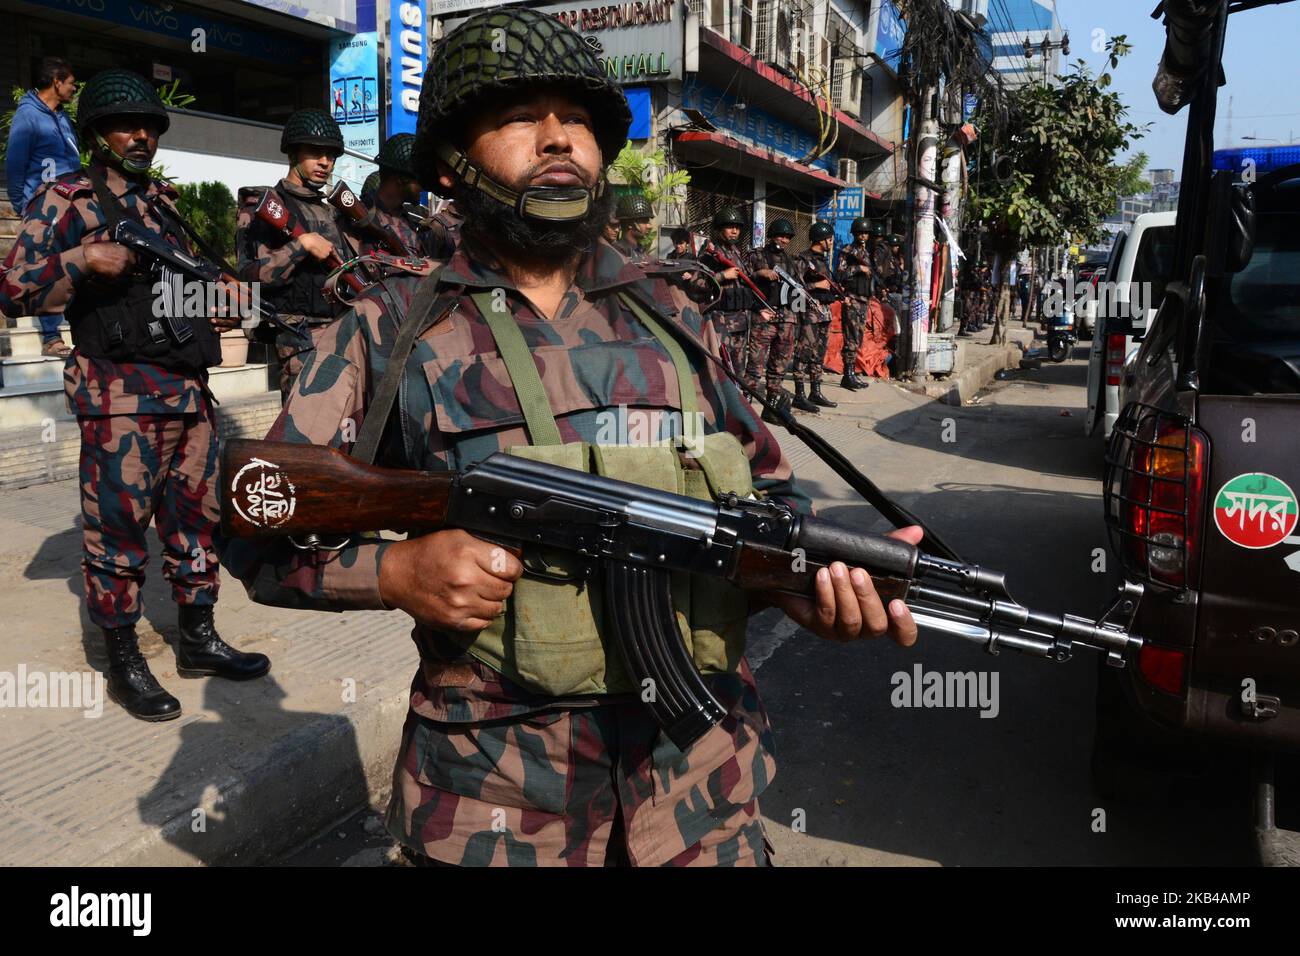 Members of Border Guard Bangladesh (BGB) stand guard in a street for the upcoming election in Dhaka, Bangladesh on December 28, 2018. Election security duties have started to help ensure a peaceful atmosphere and maintain law and order across the country for the 30 December polls. According to the Bangladesh Election Commission, the 11th general election is scheduled on 30 December 2018 to select members of the national parliament in Bangladesh. (Photo by Mamunur Rashid/NurPhoto) Stock Photo